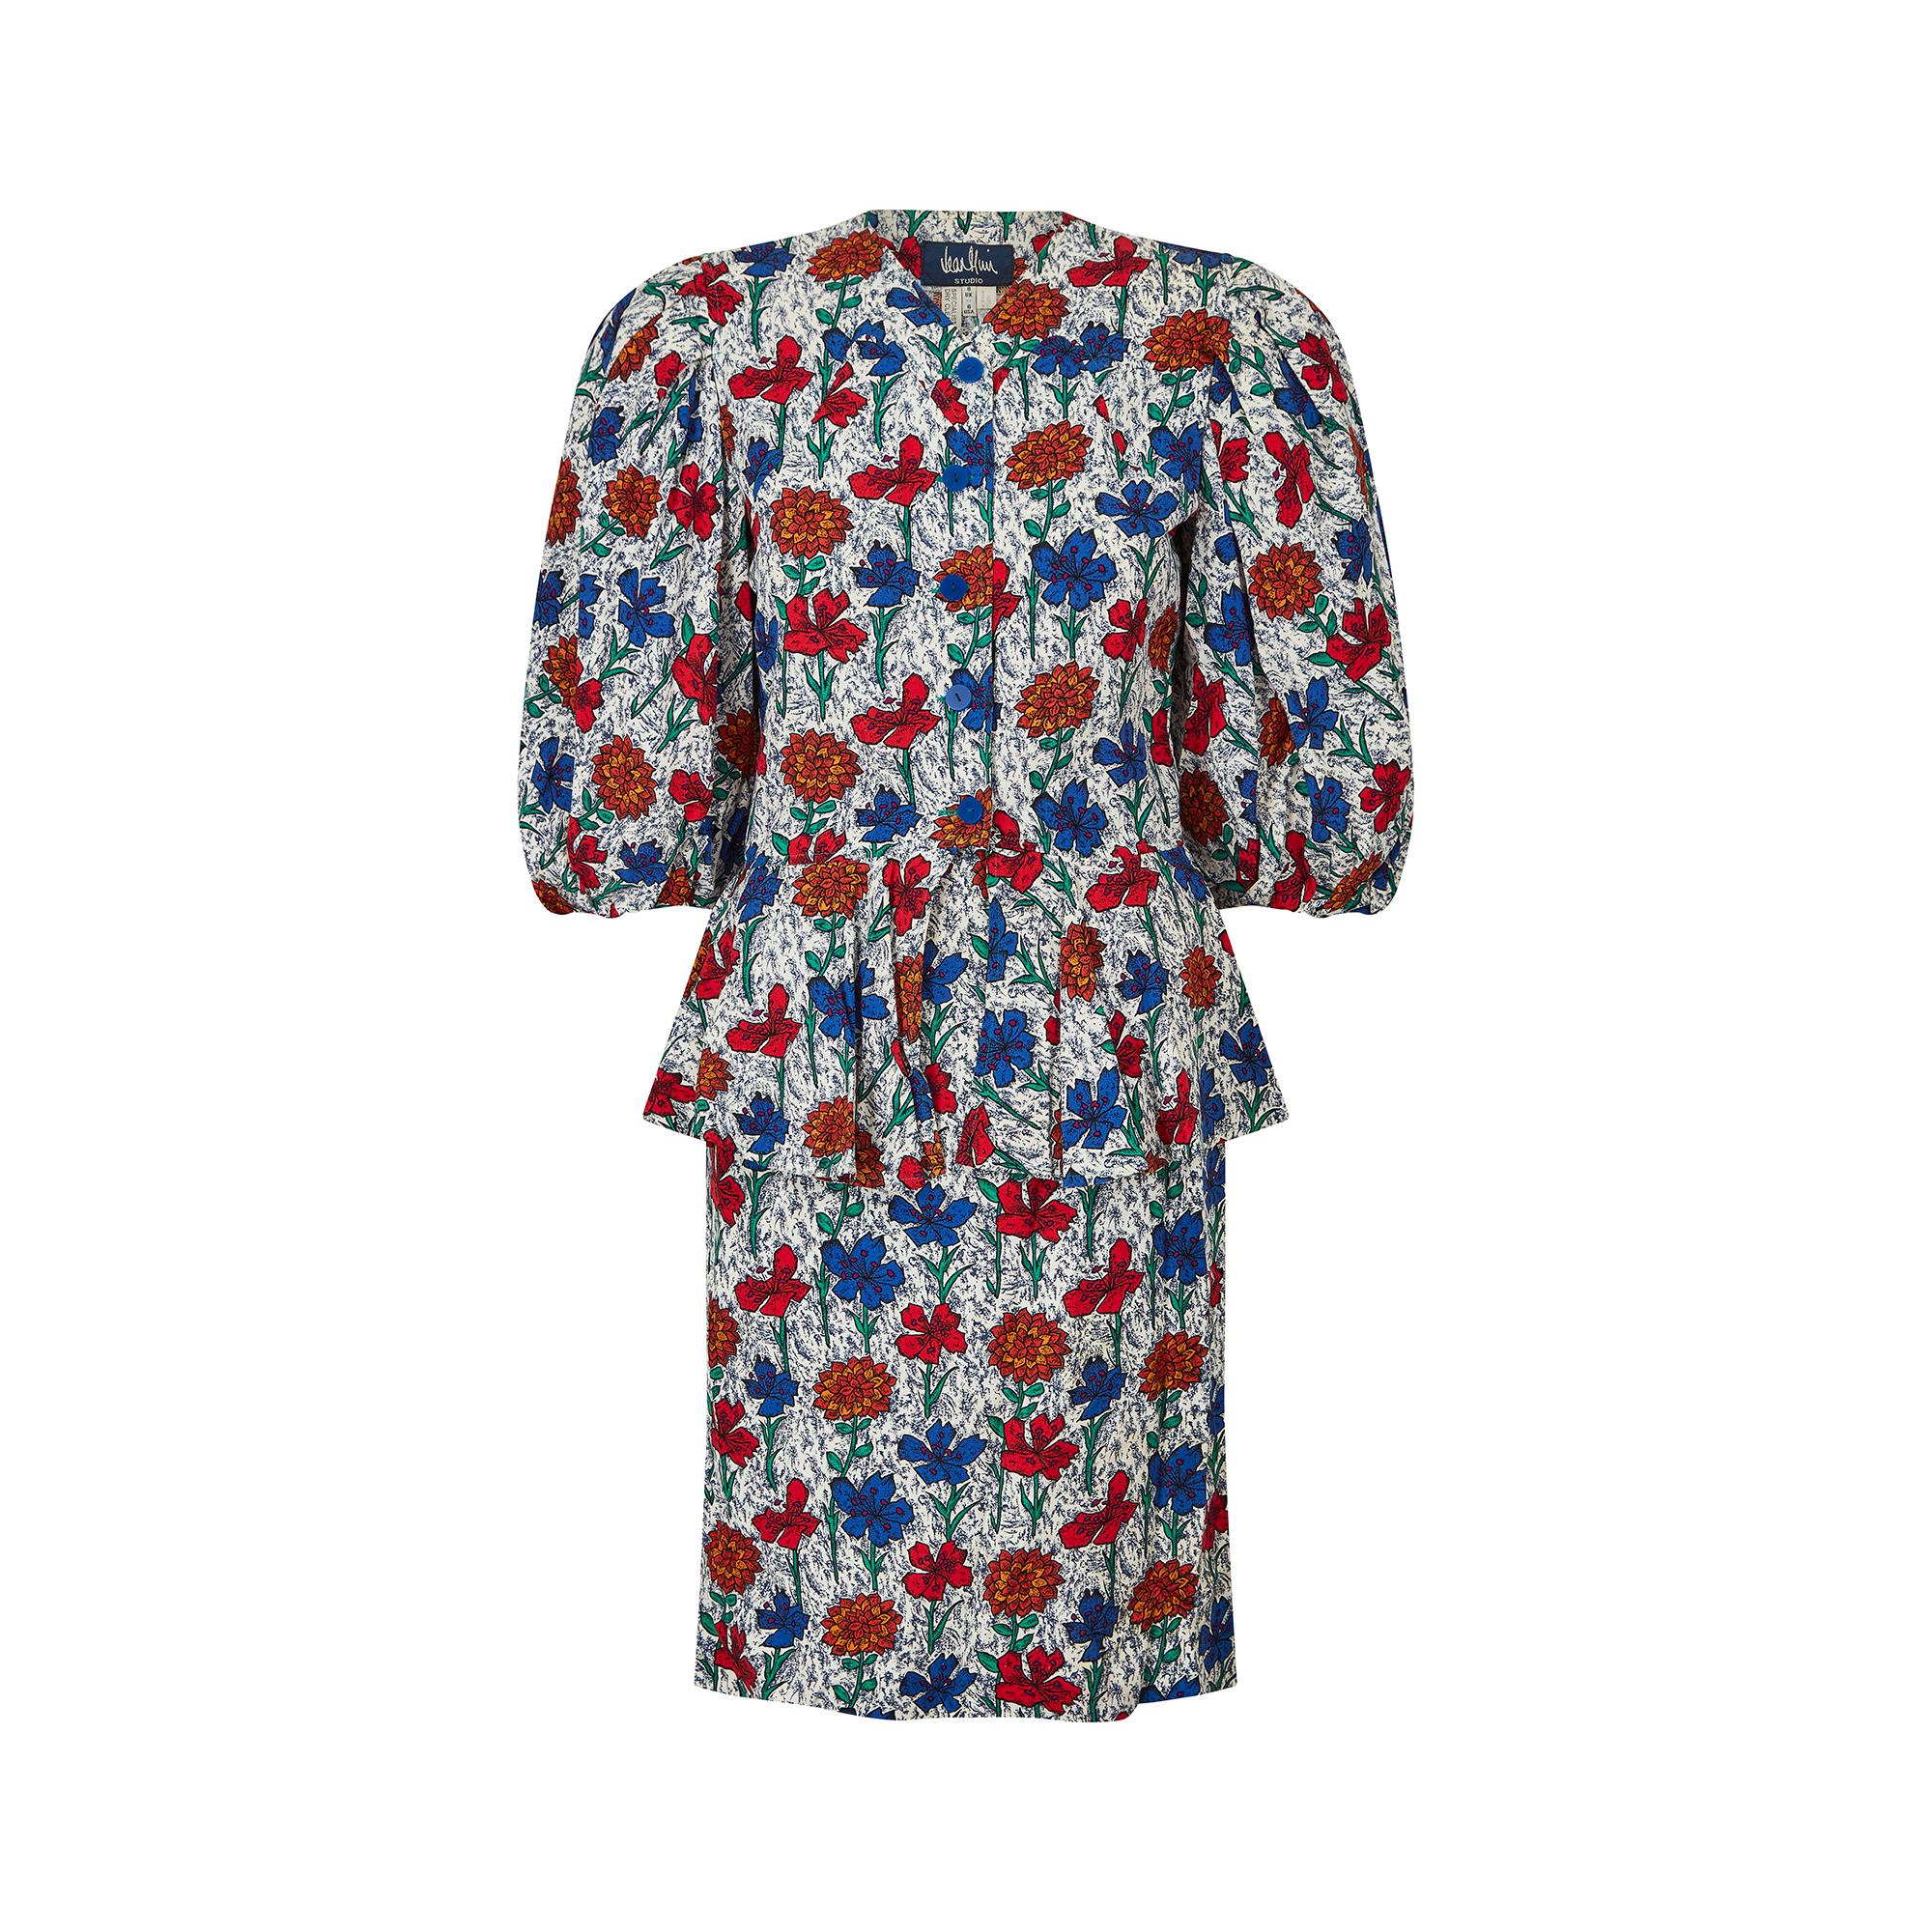 Vintage Jean Muir skirt suit from the mid to late 1980s. Both the skirt and the jacket are made using a brightly printed and lightweight viscose material, featuring bold blue, red and orange flowers against a mottled blue and white background. The